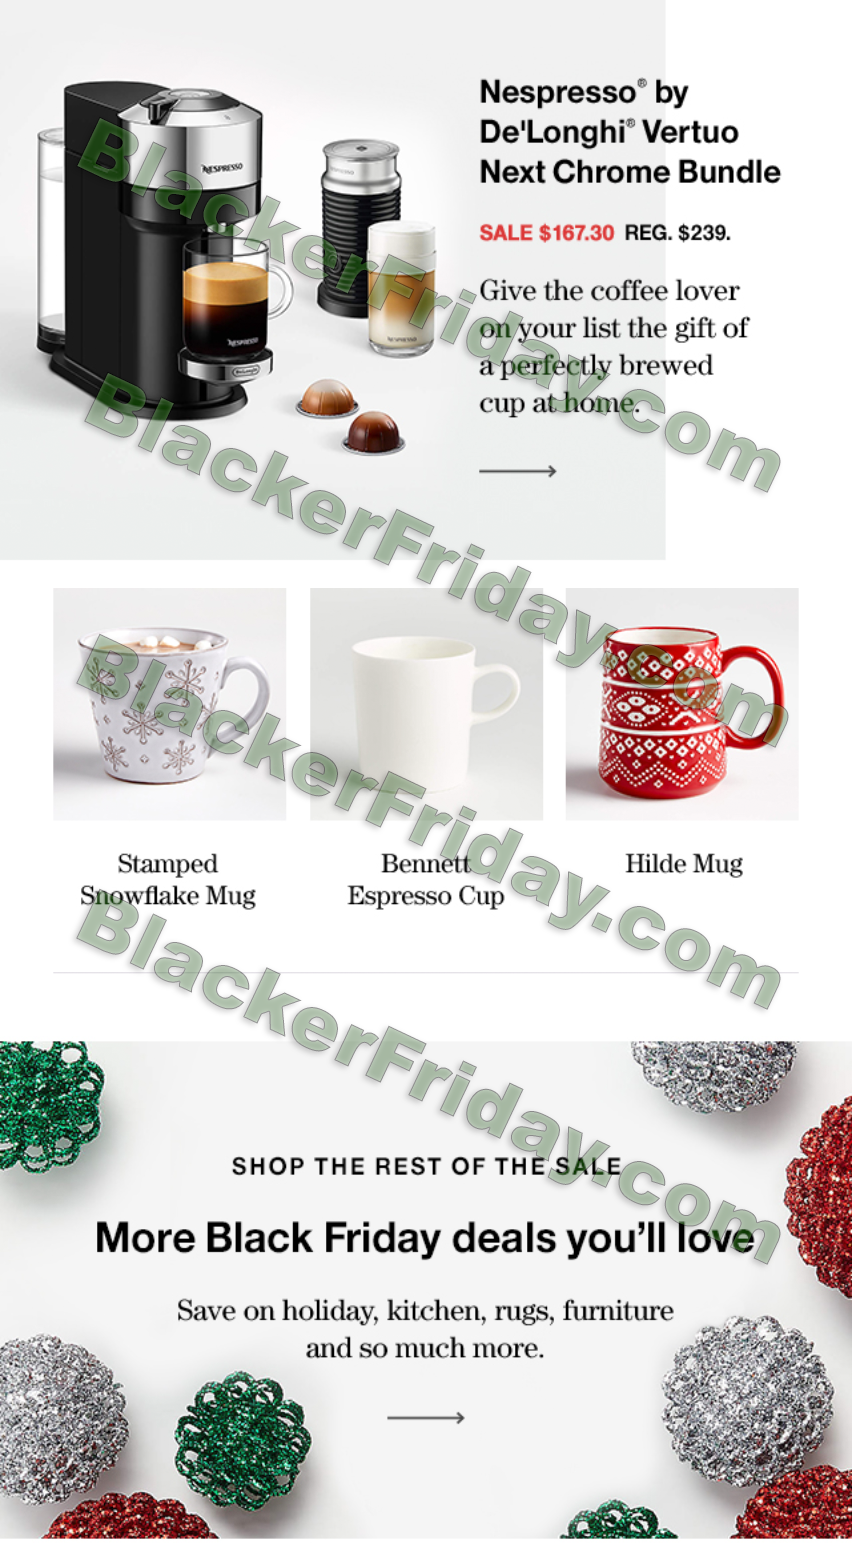 Crate & Barrel Black Friday 2021 Sale - What to Expect - Blacker Friday